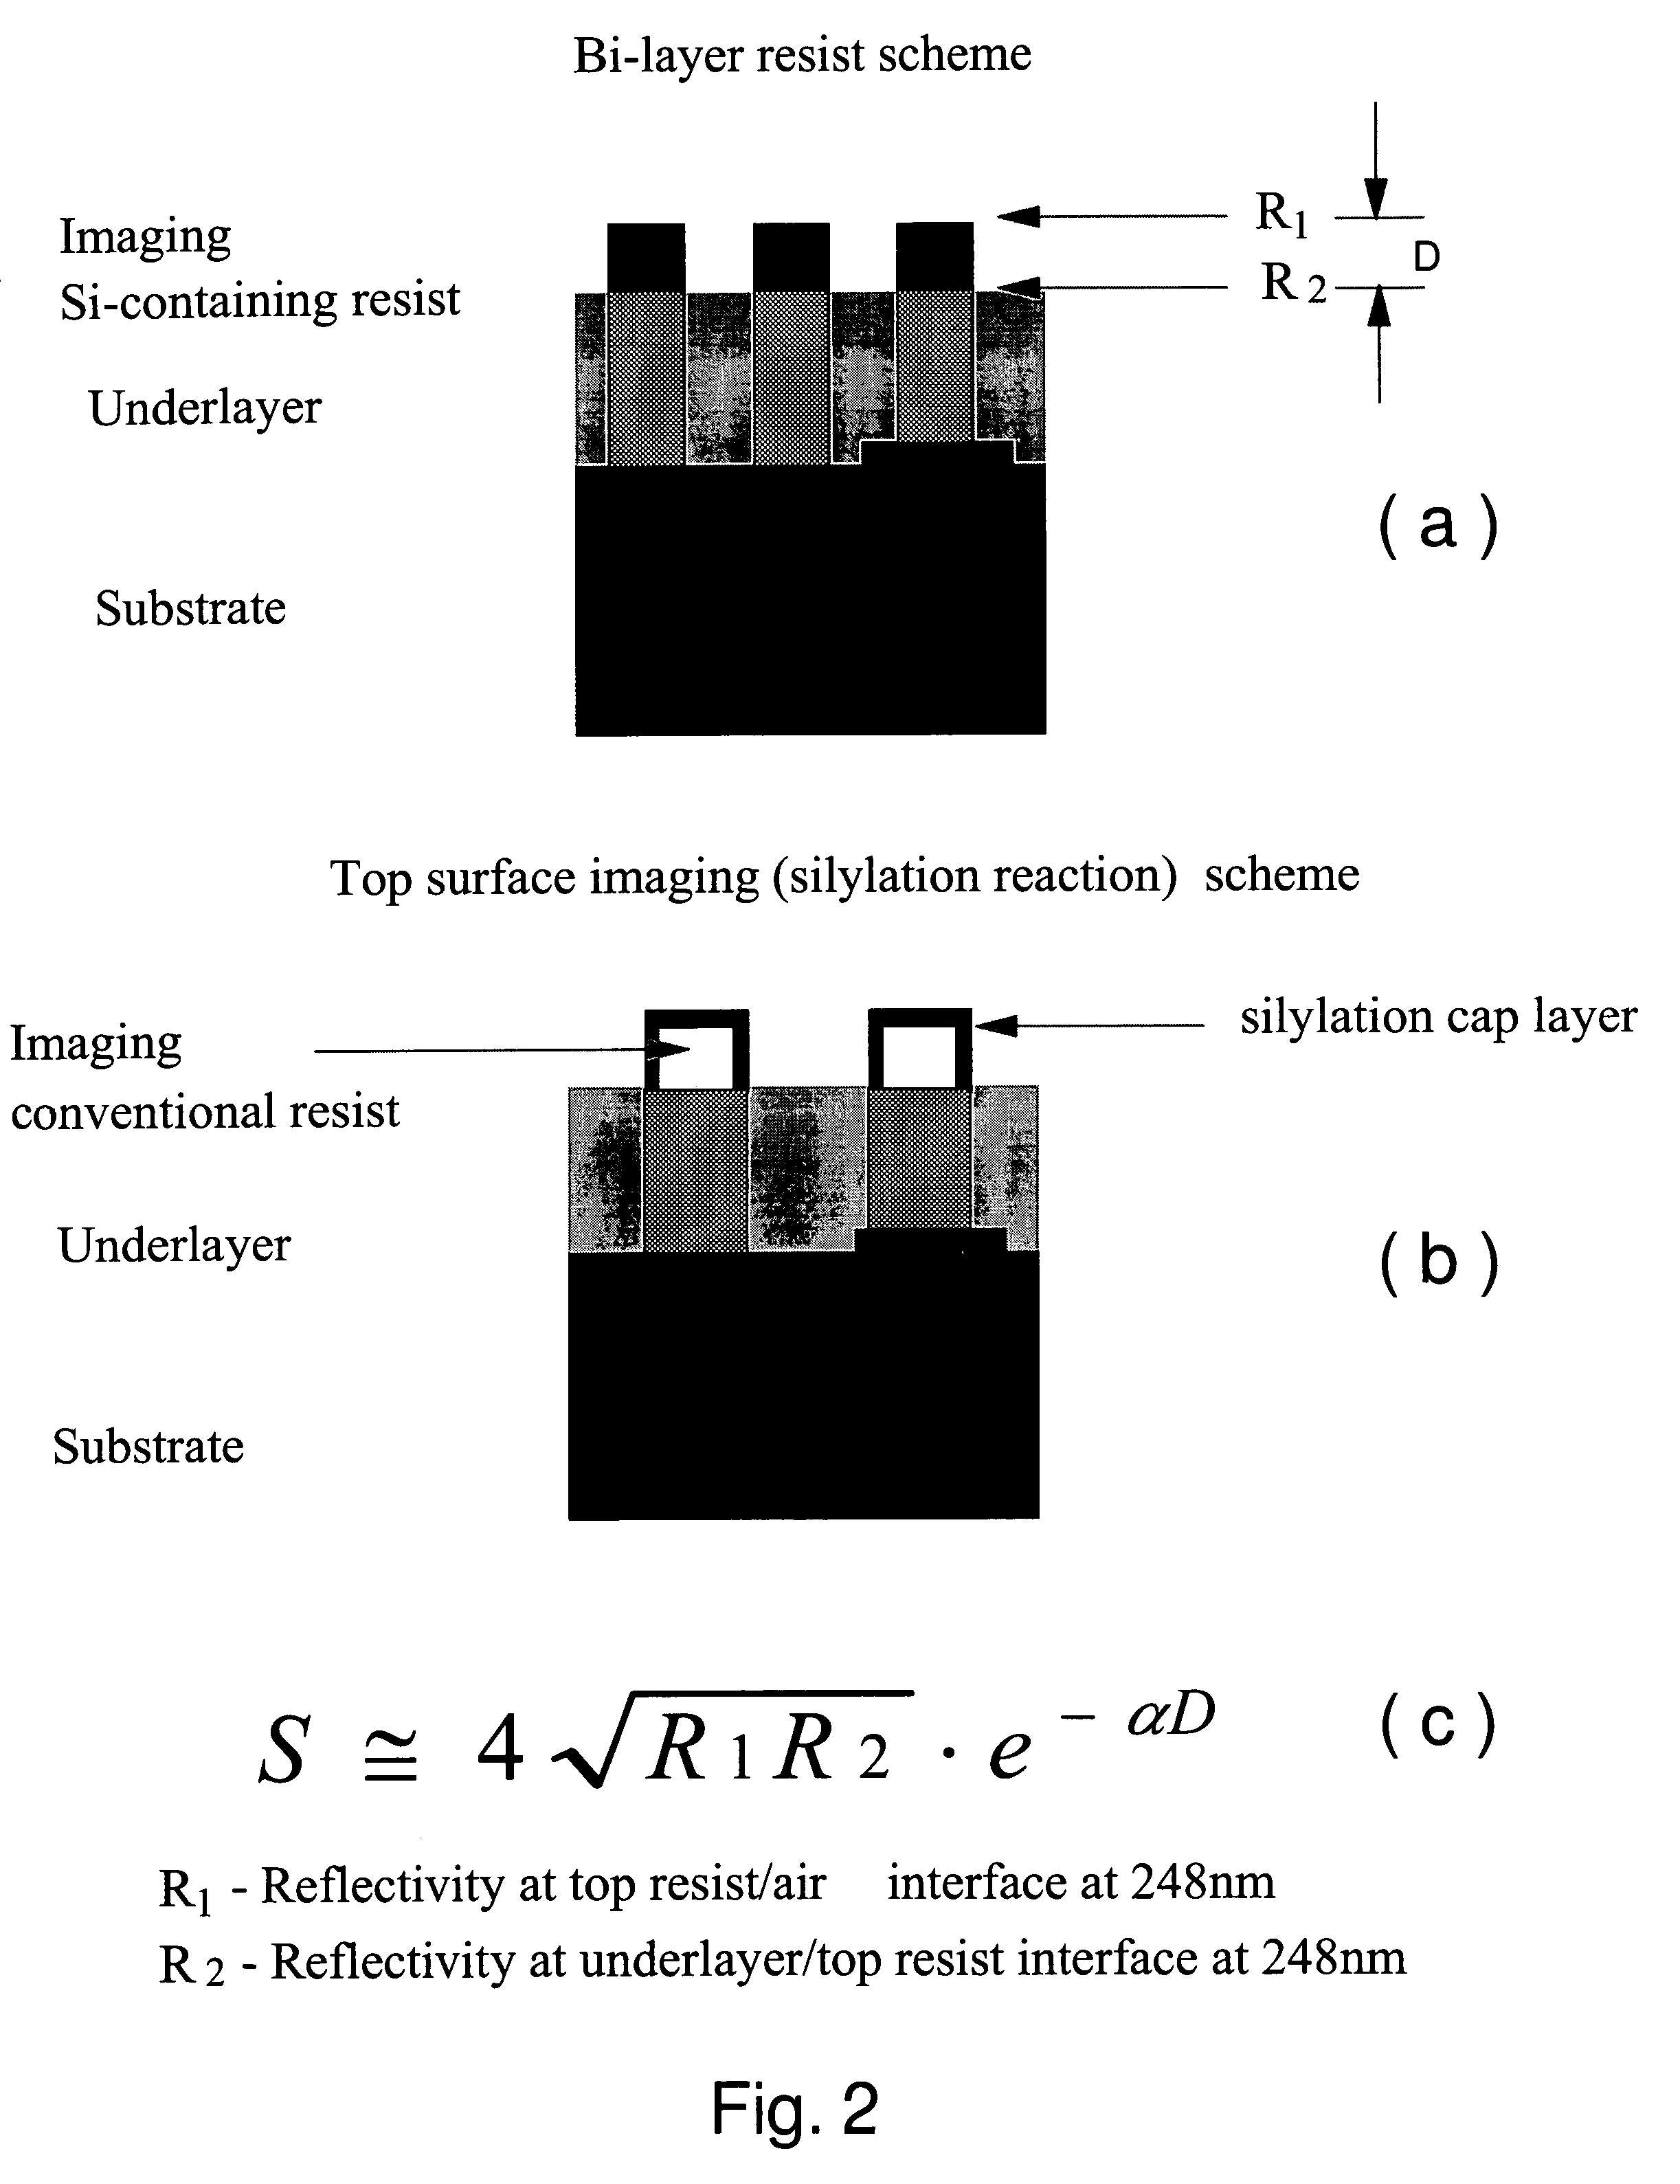 Multilayered resist systems using tuned polymer films as underlayers and methods of fabrication thereof